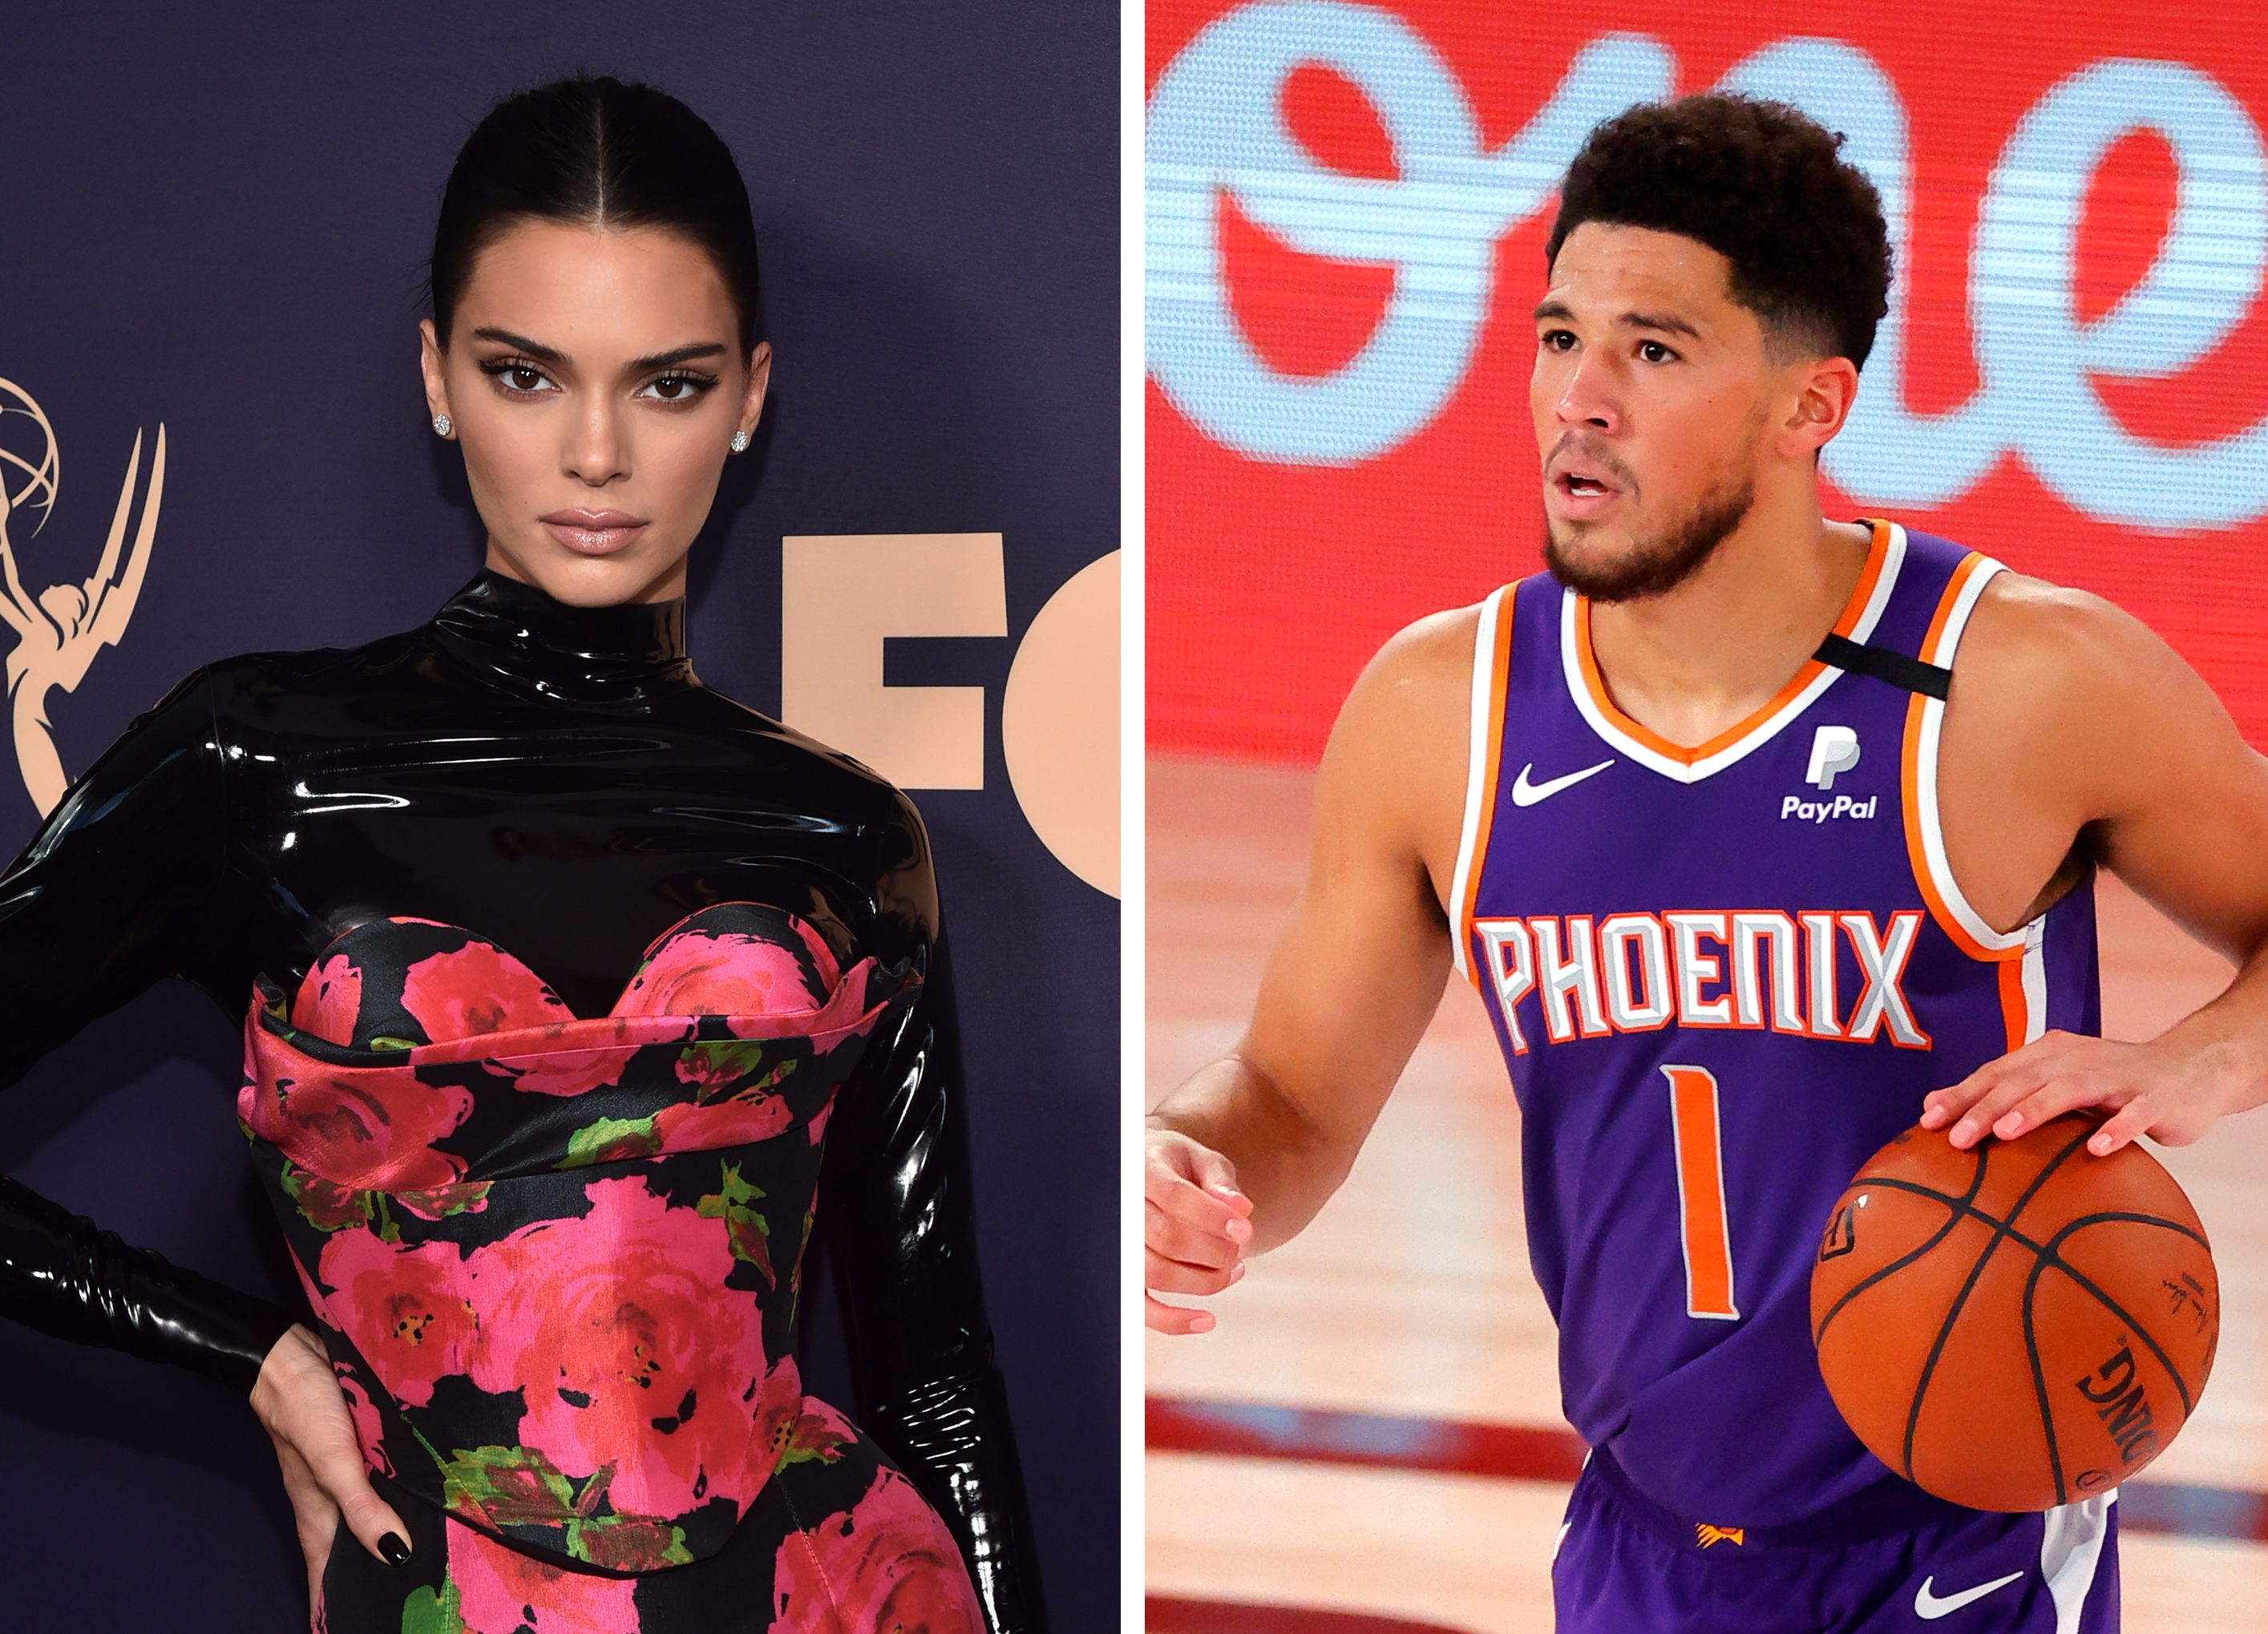 Kendall Jenner wants Ben Simmons back after he got flirty with